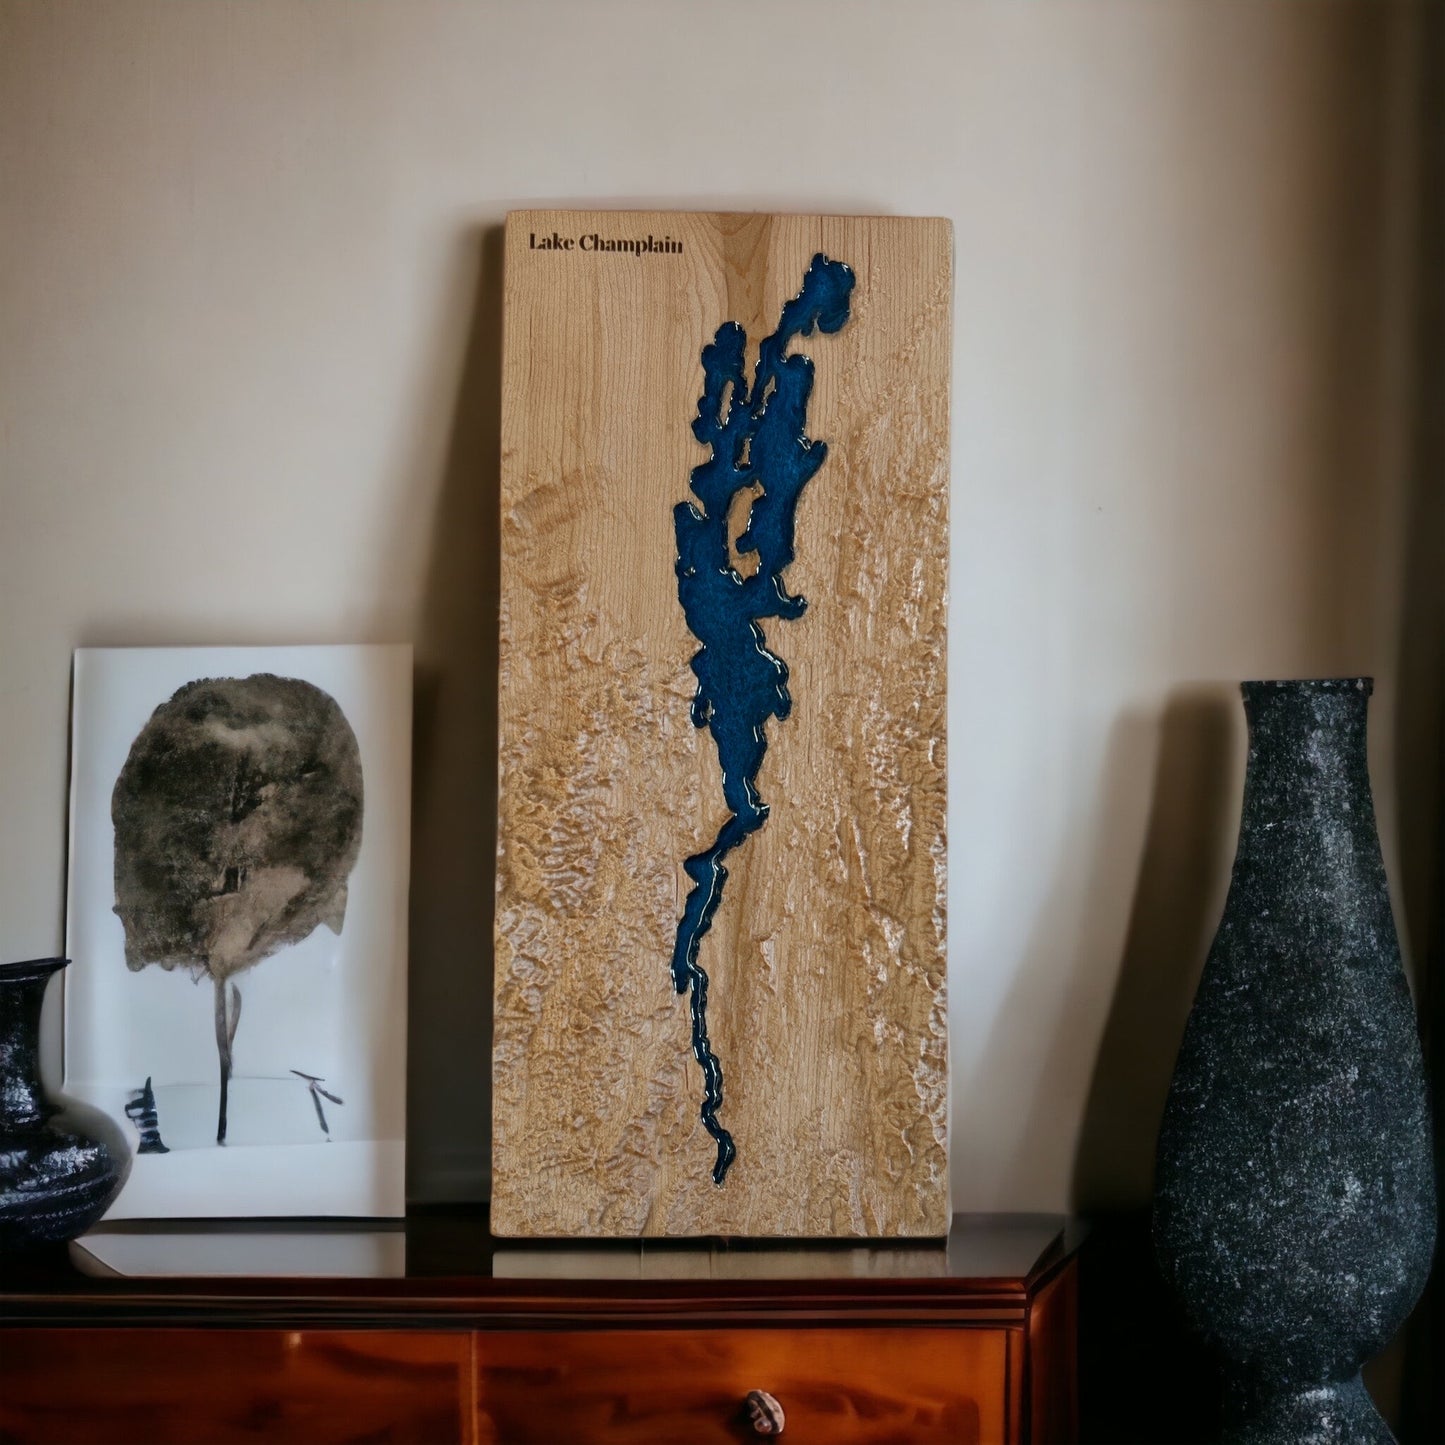 Lake Champlain 3D Relief Map | Lake Champlain Wood Epoxy Art | New York | Vermont | Aerial View Lake Map | Gift for Husband | Travel Gift